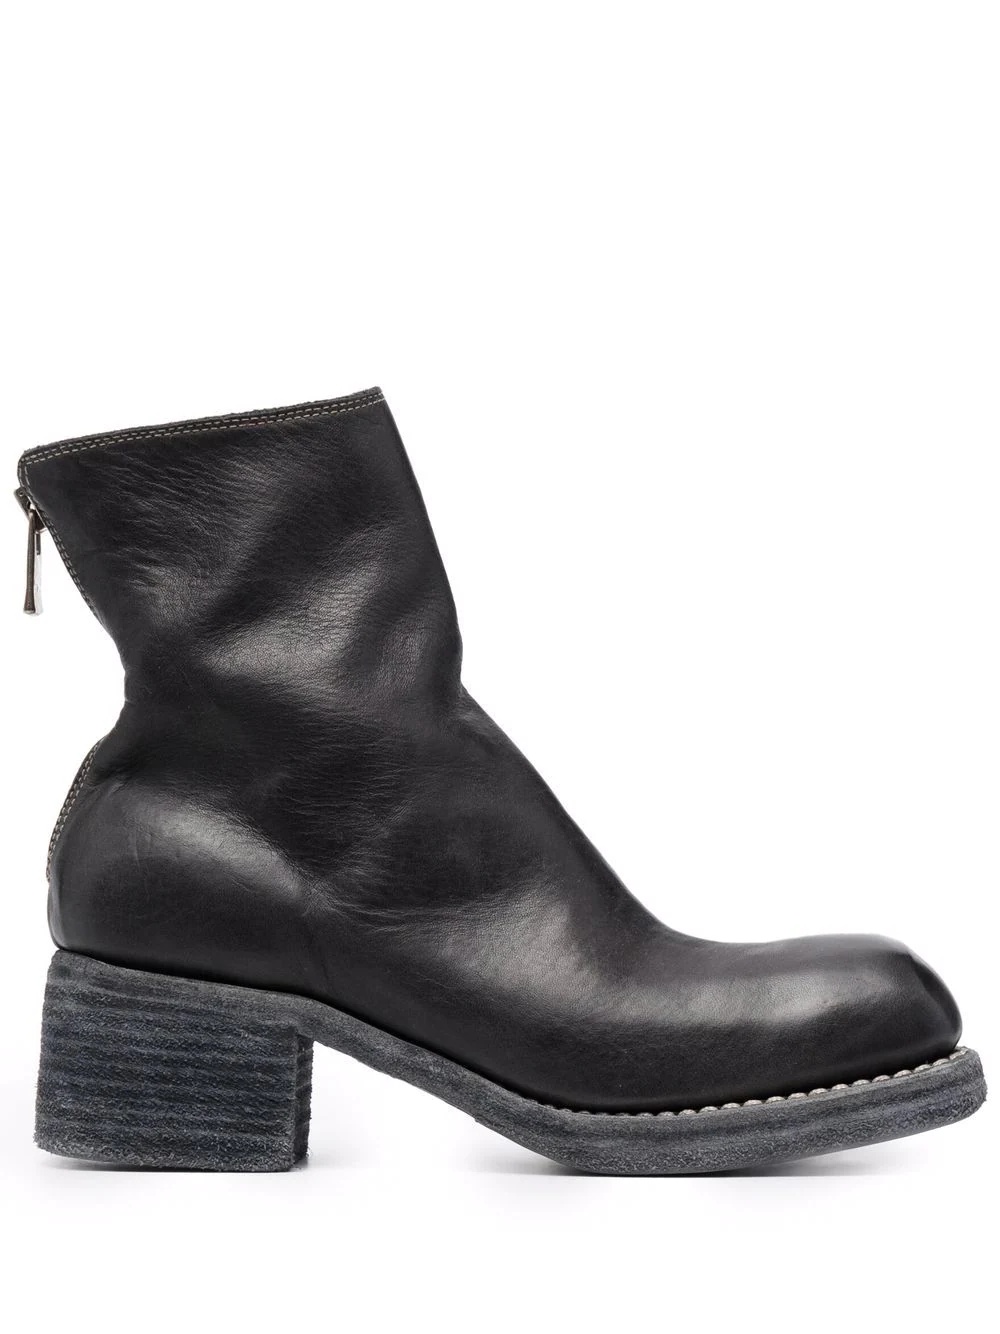 zip-front ankle boots - 1